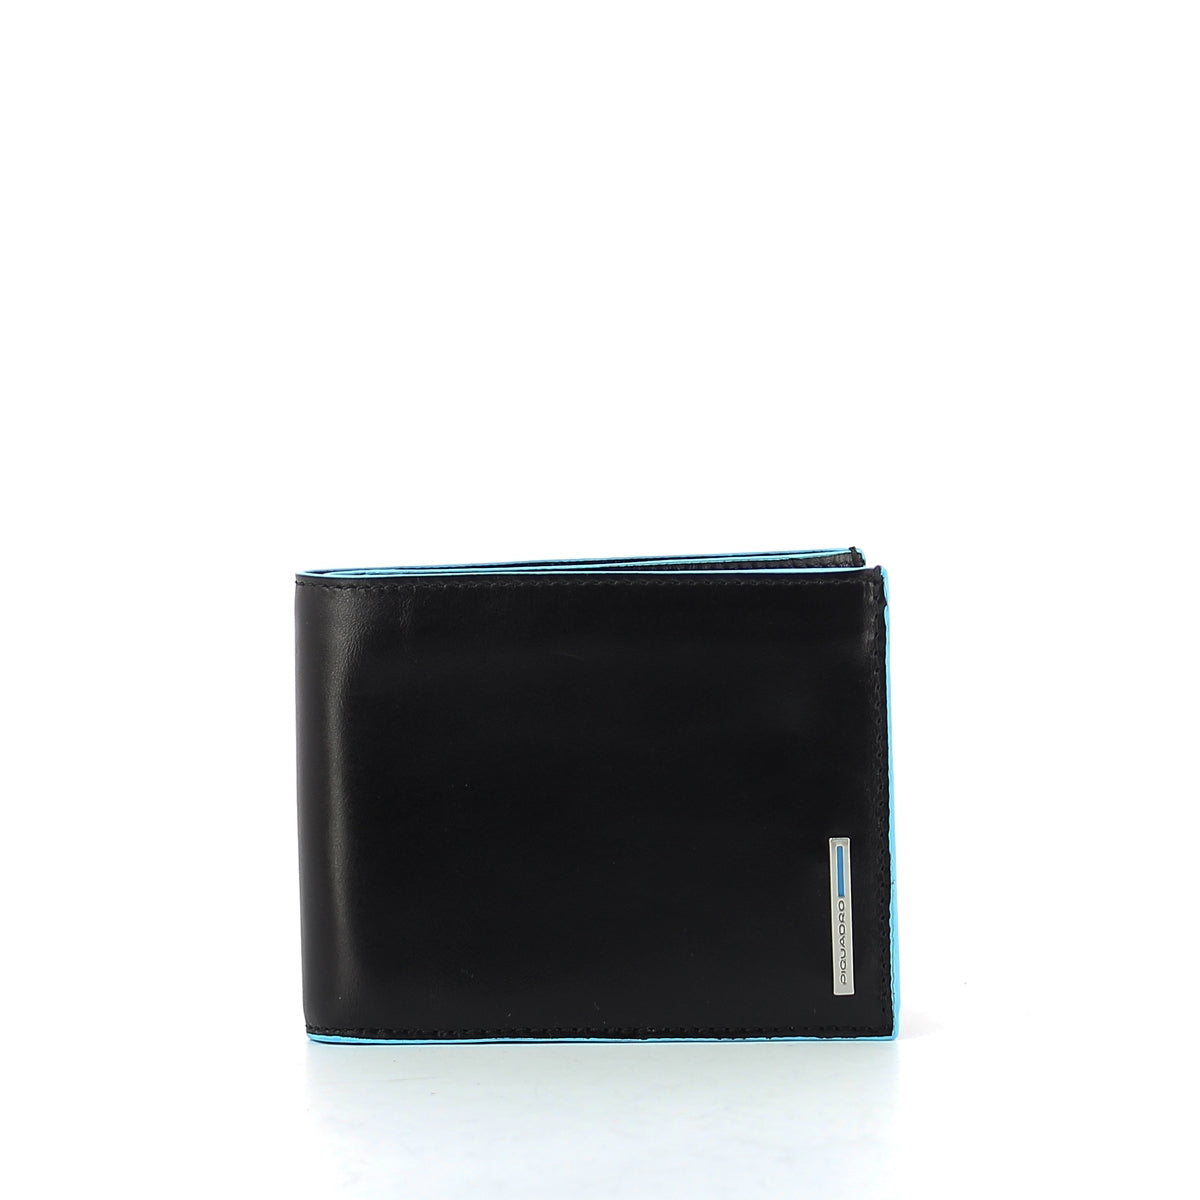 Piquadro - Wallet with coin pouch Blue Square - PU1240B2 - NERO